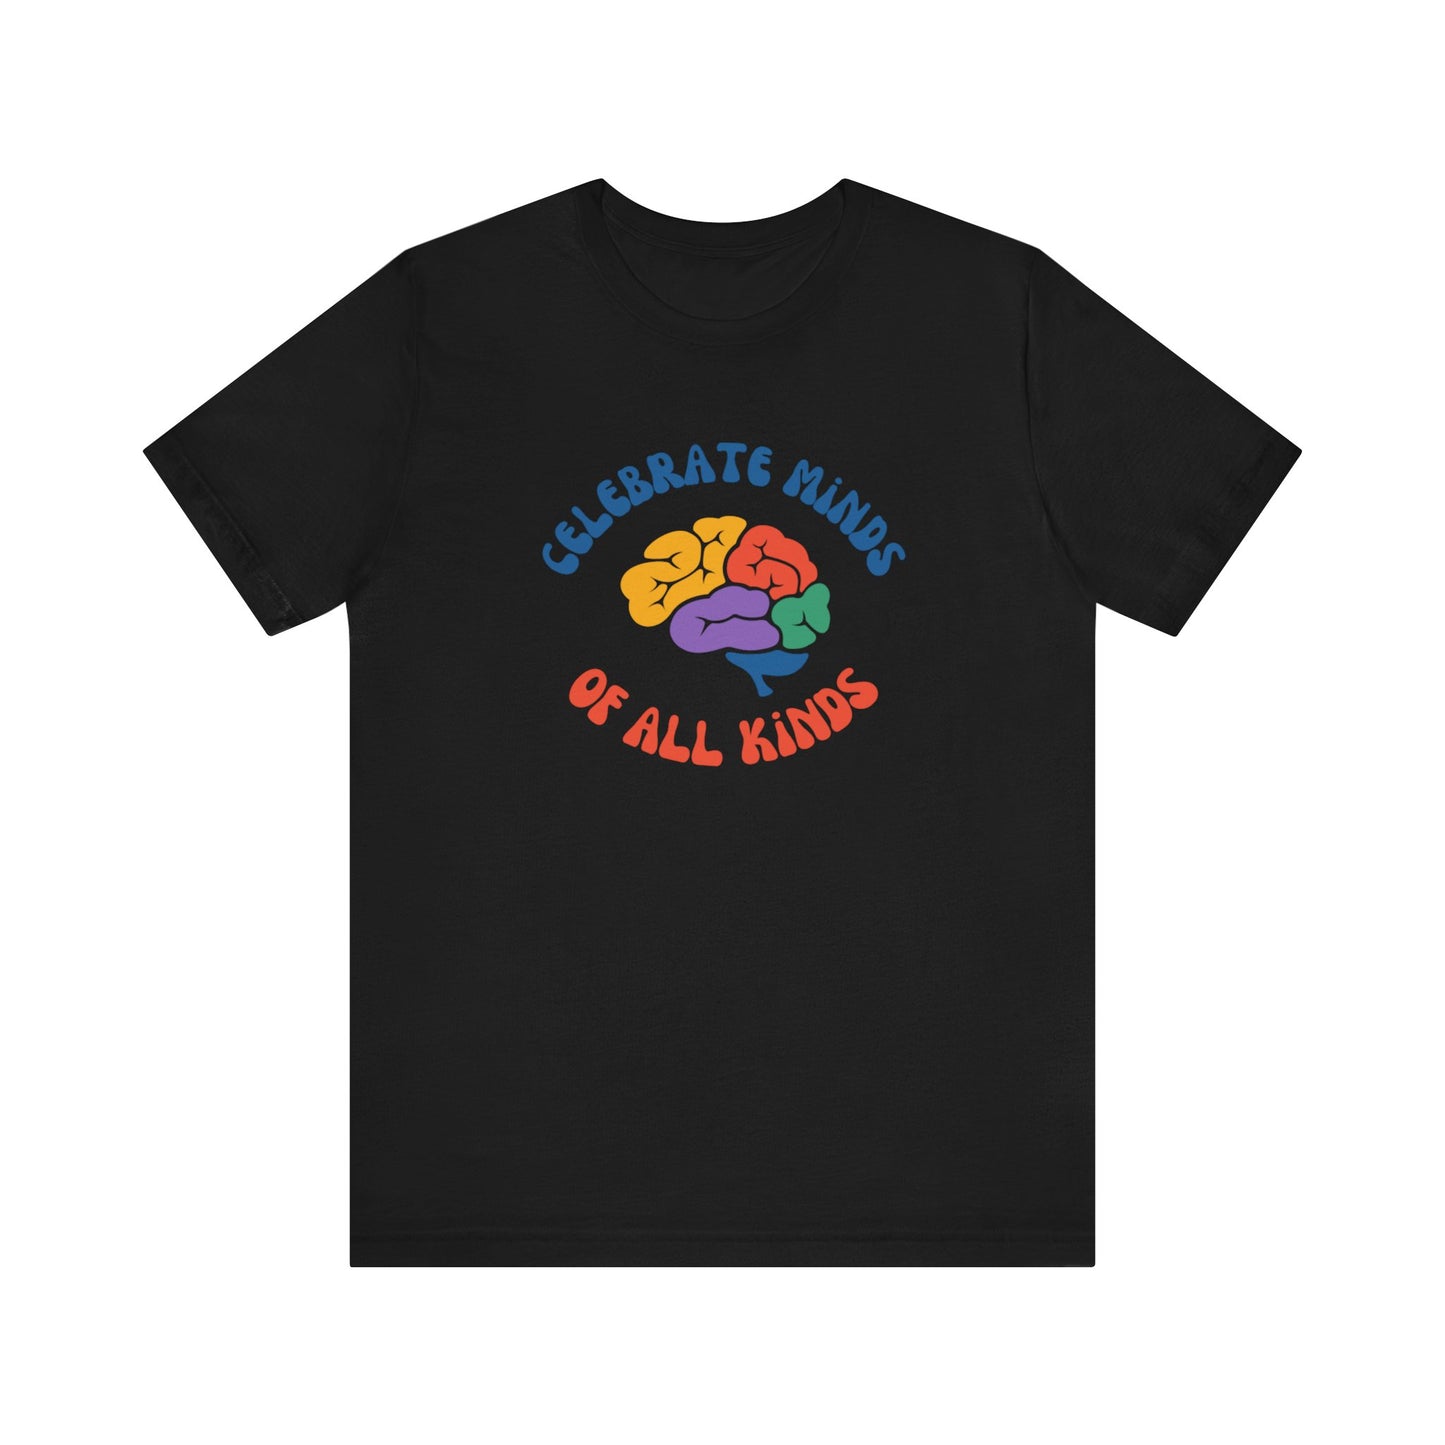 Celebrate Minds of All Kinds Unisex Jersey Short Sleeve Tee